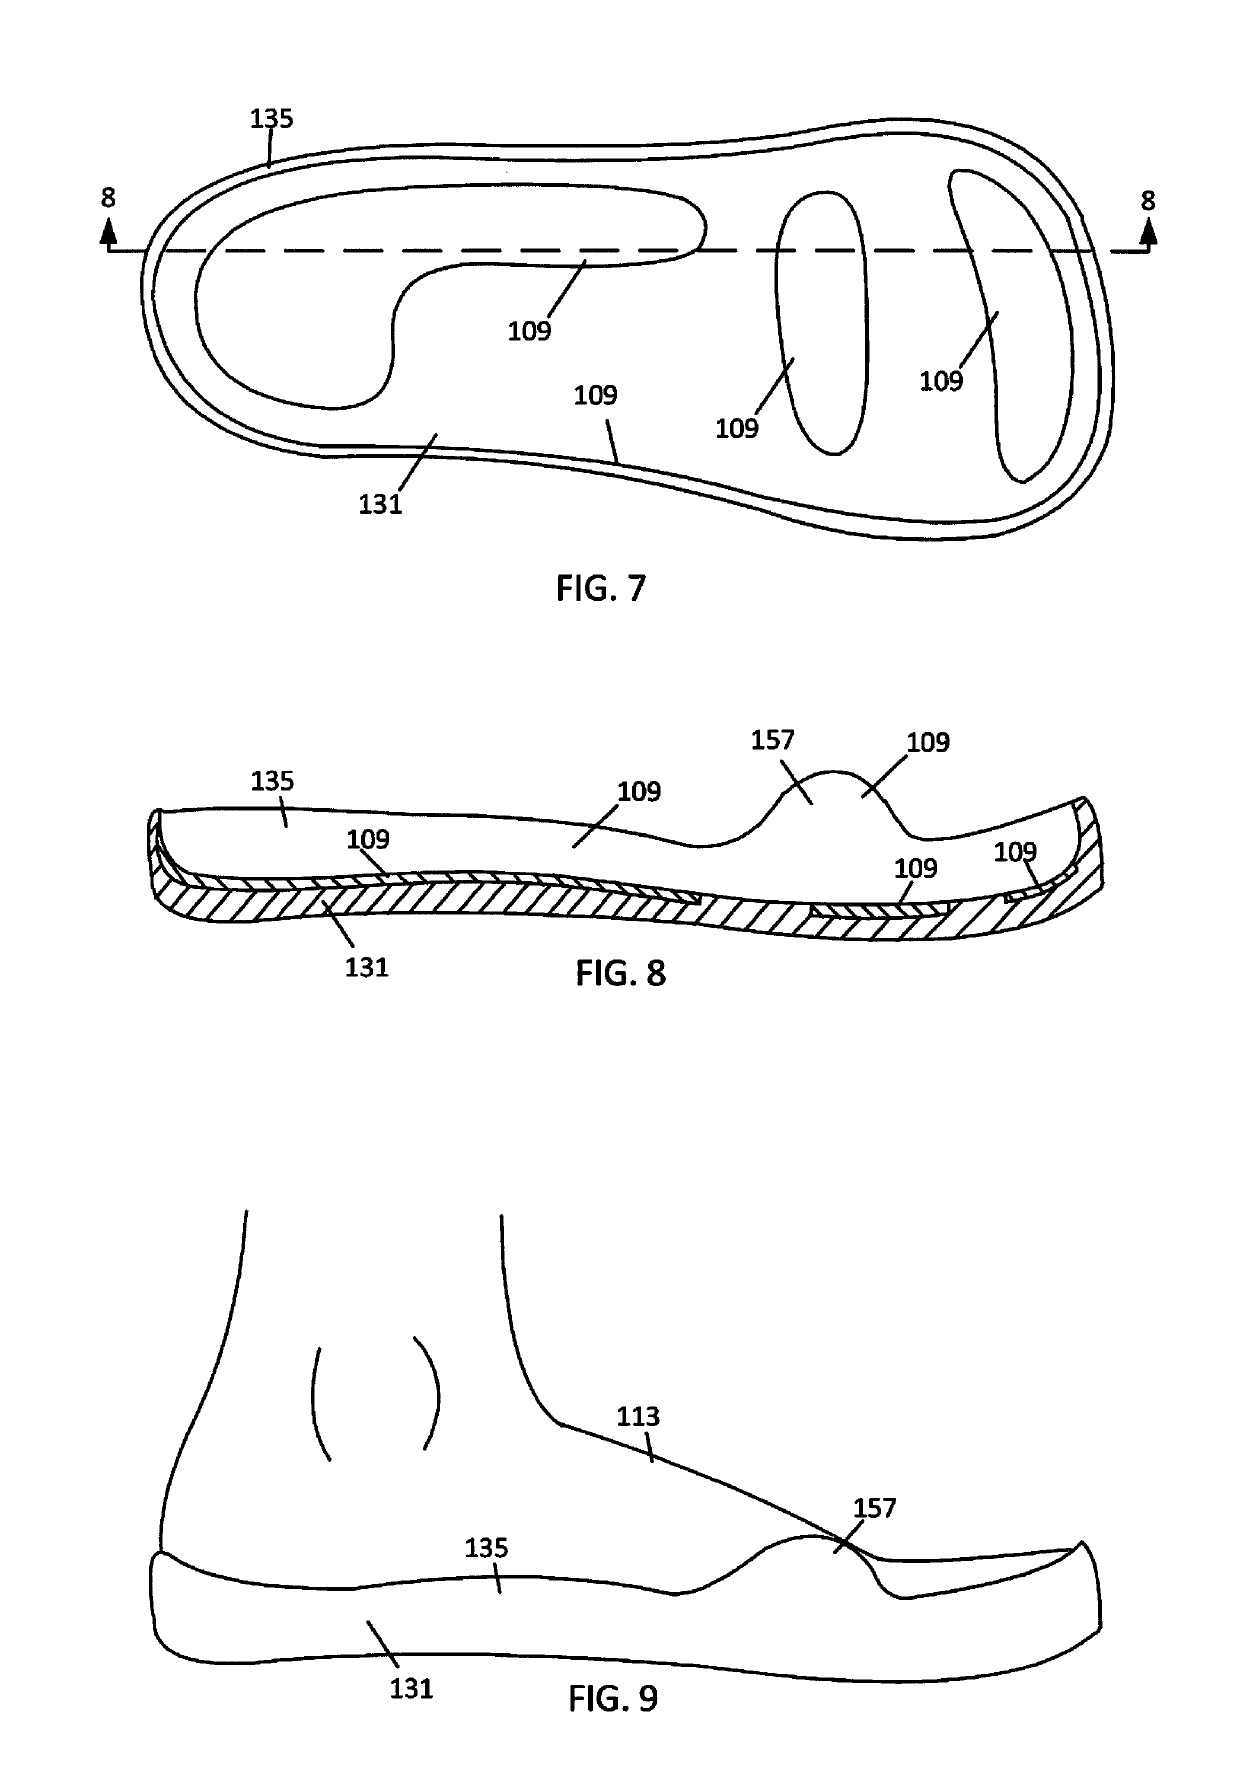 Adhesive footwear and devices